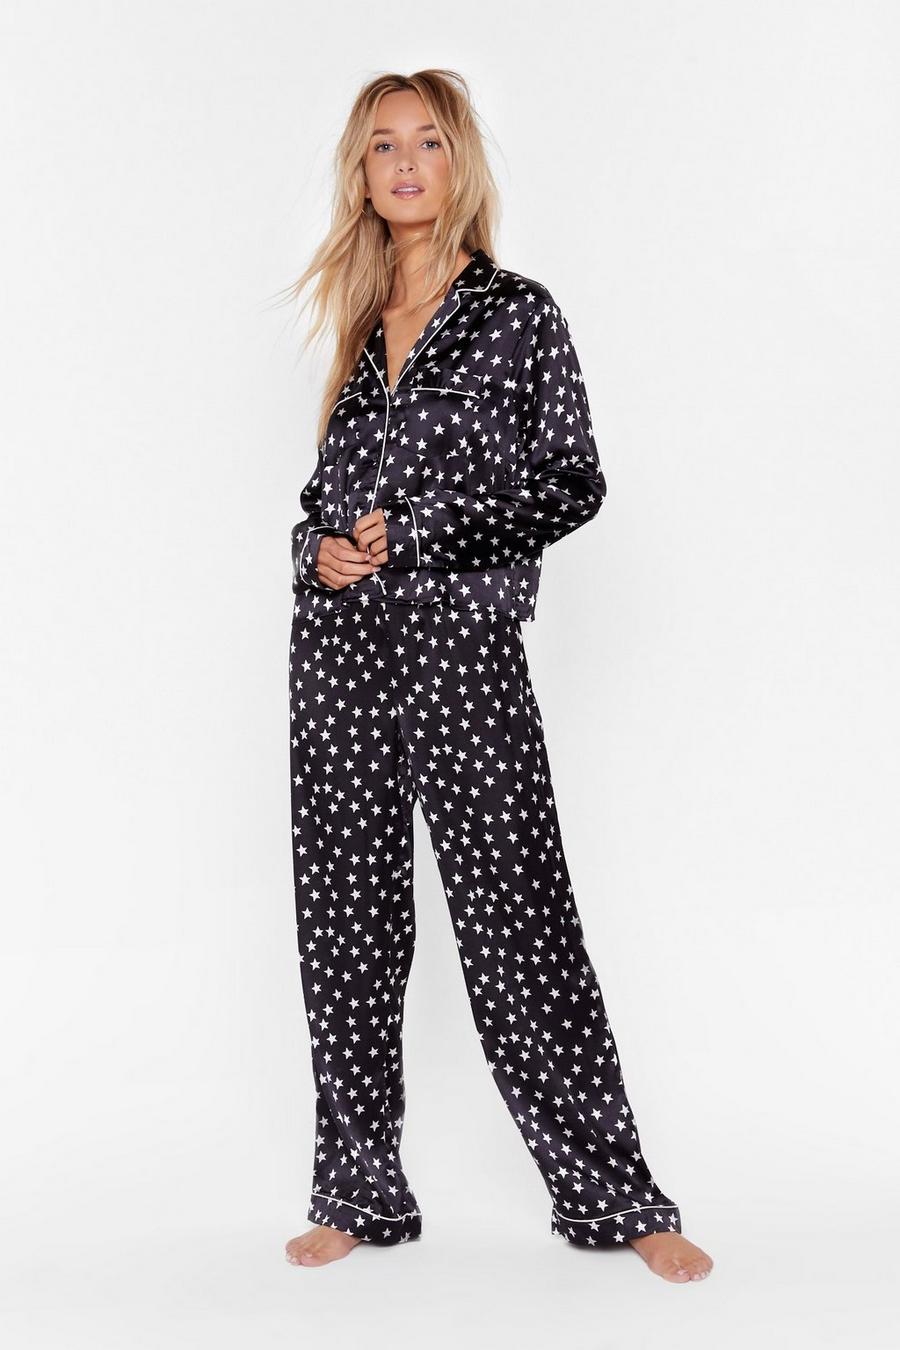 Star-t the Party Satin Trousers Pyjama Set